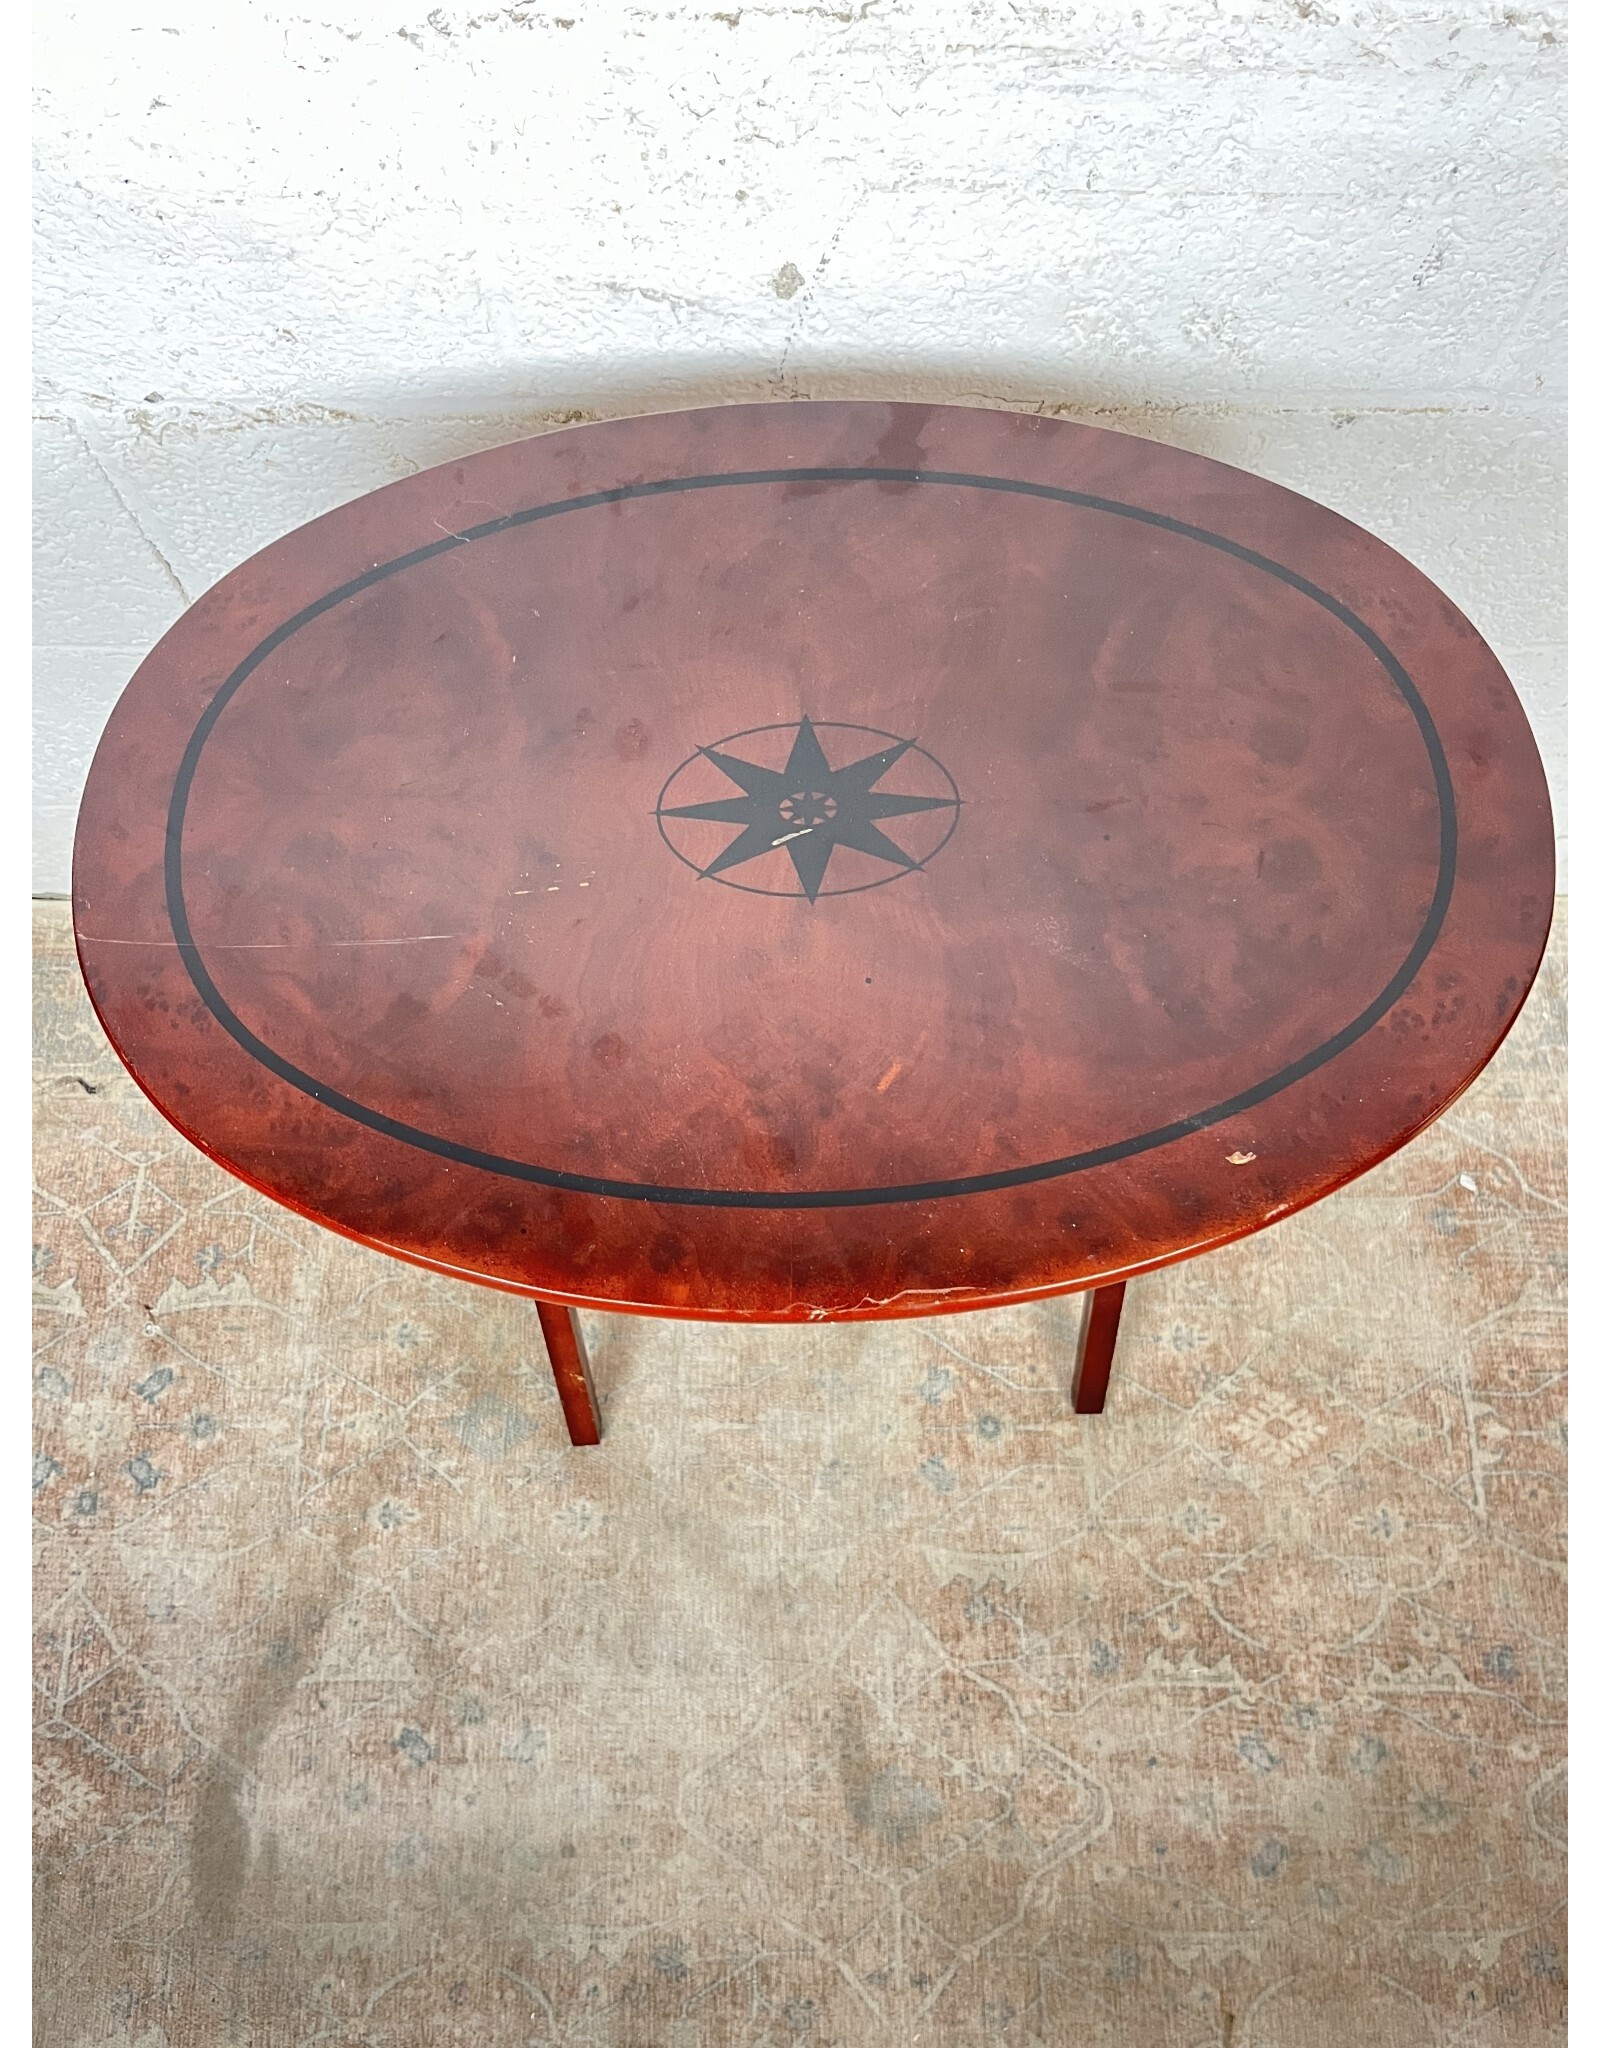 Red Star Wooden Folding Table in Stand (3 set)